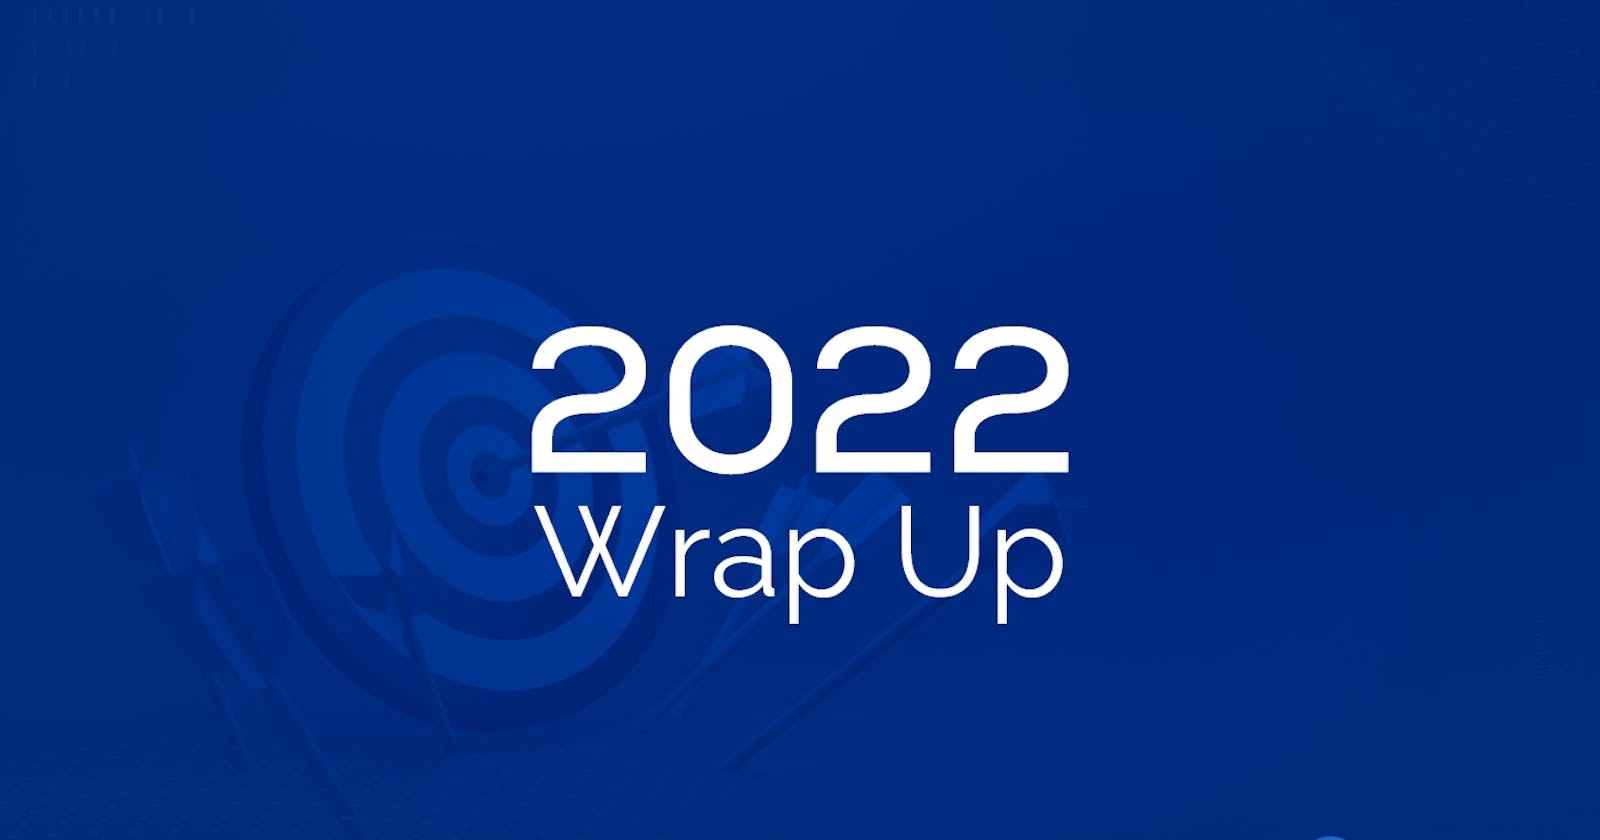 The Year 2022 Wrap up! Becoming a designer and a Developer